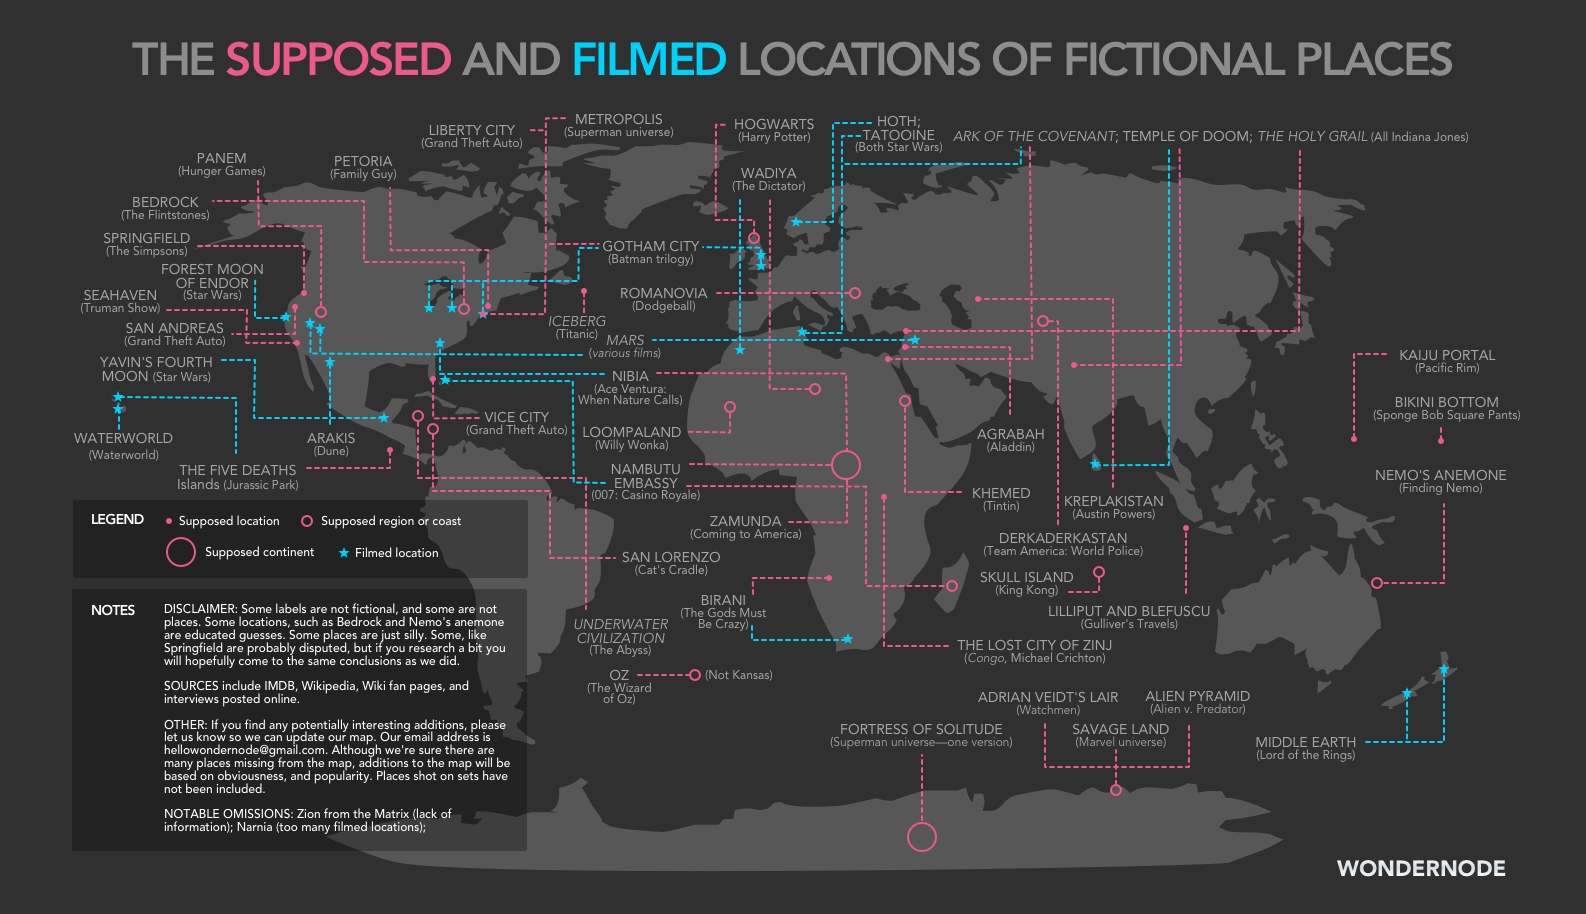 http://www.ritholtz.com/blog/2014/06/the-supposed-and-filmed-locations-of-fictional-places/